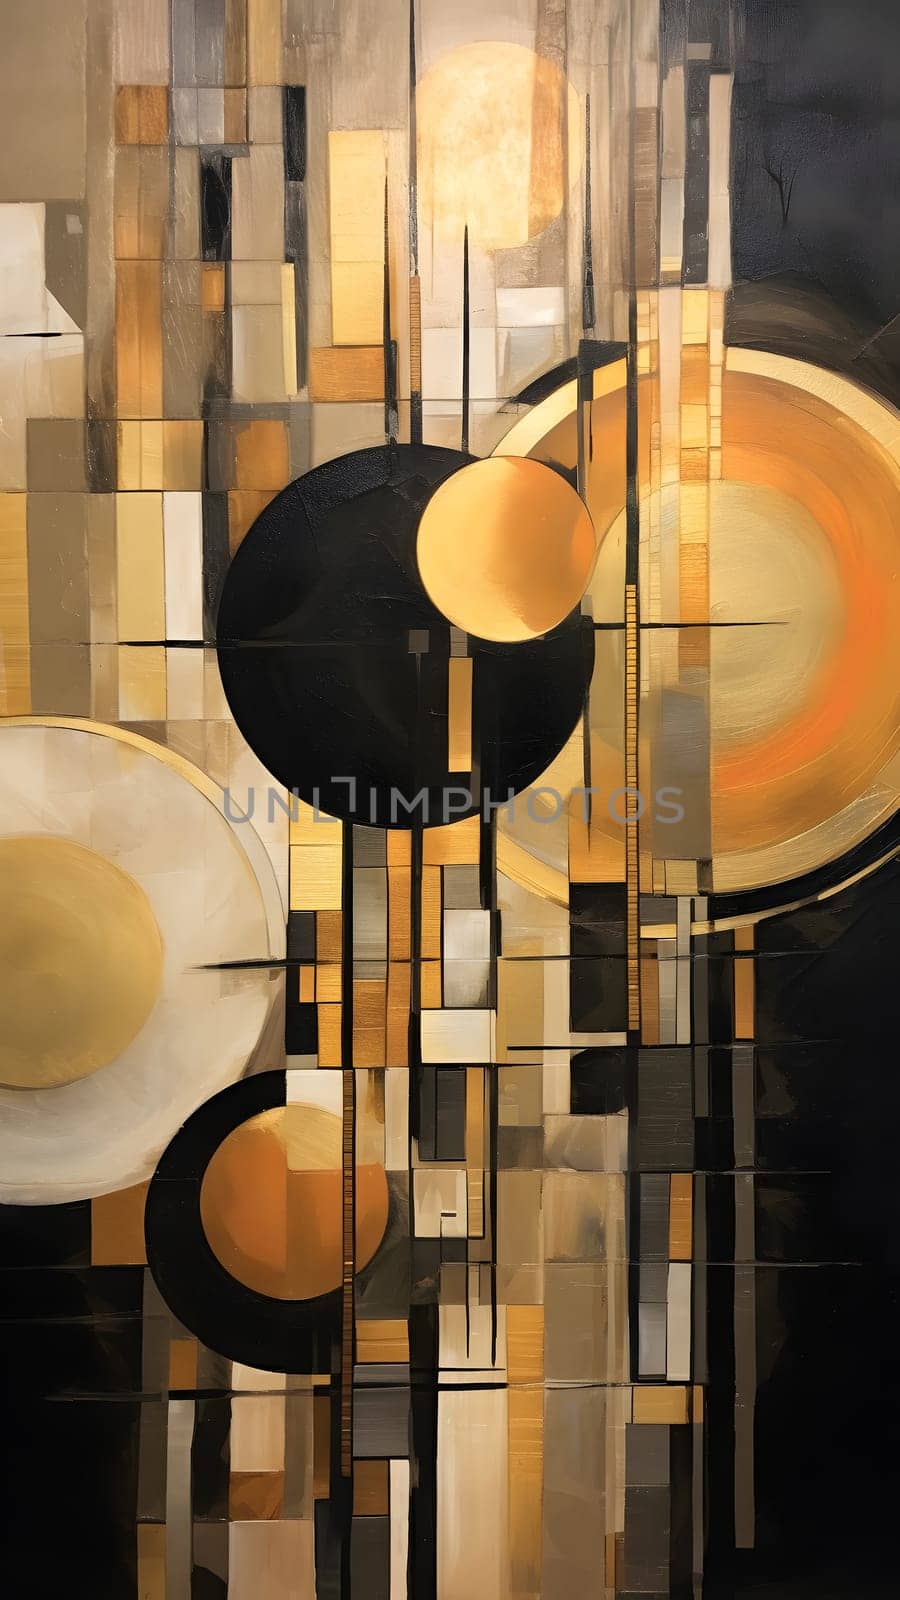 white, gold and black colored mid century art, neural network generated image by z1b